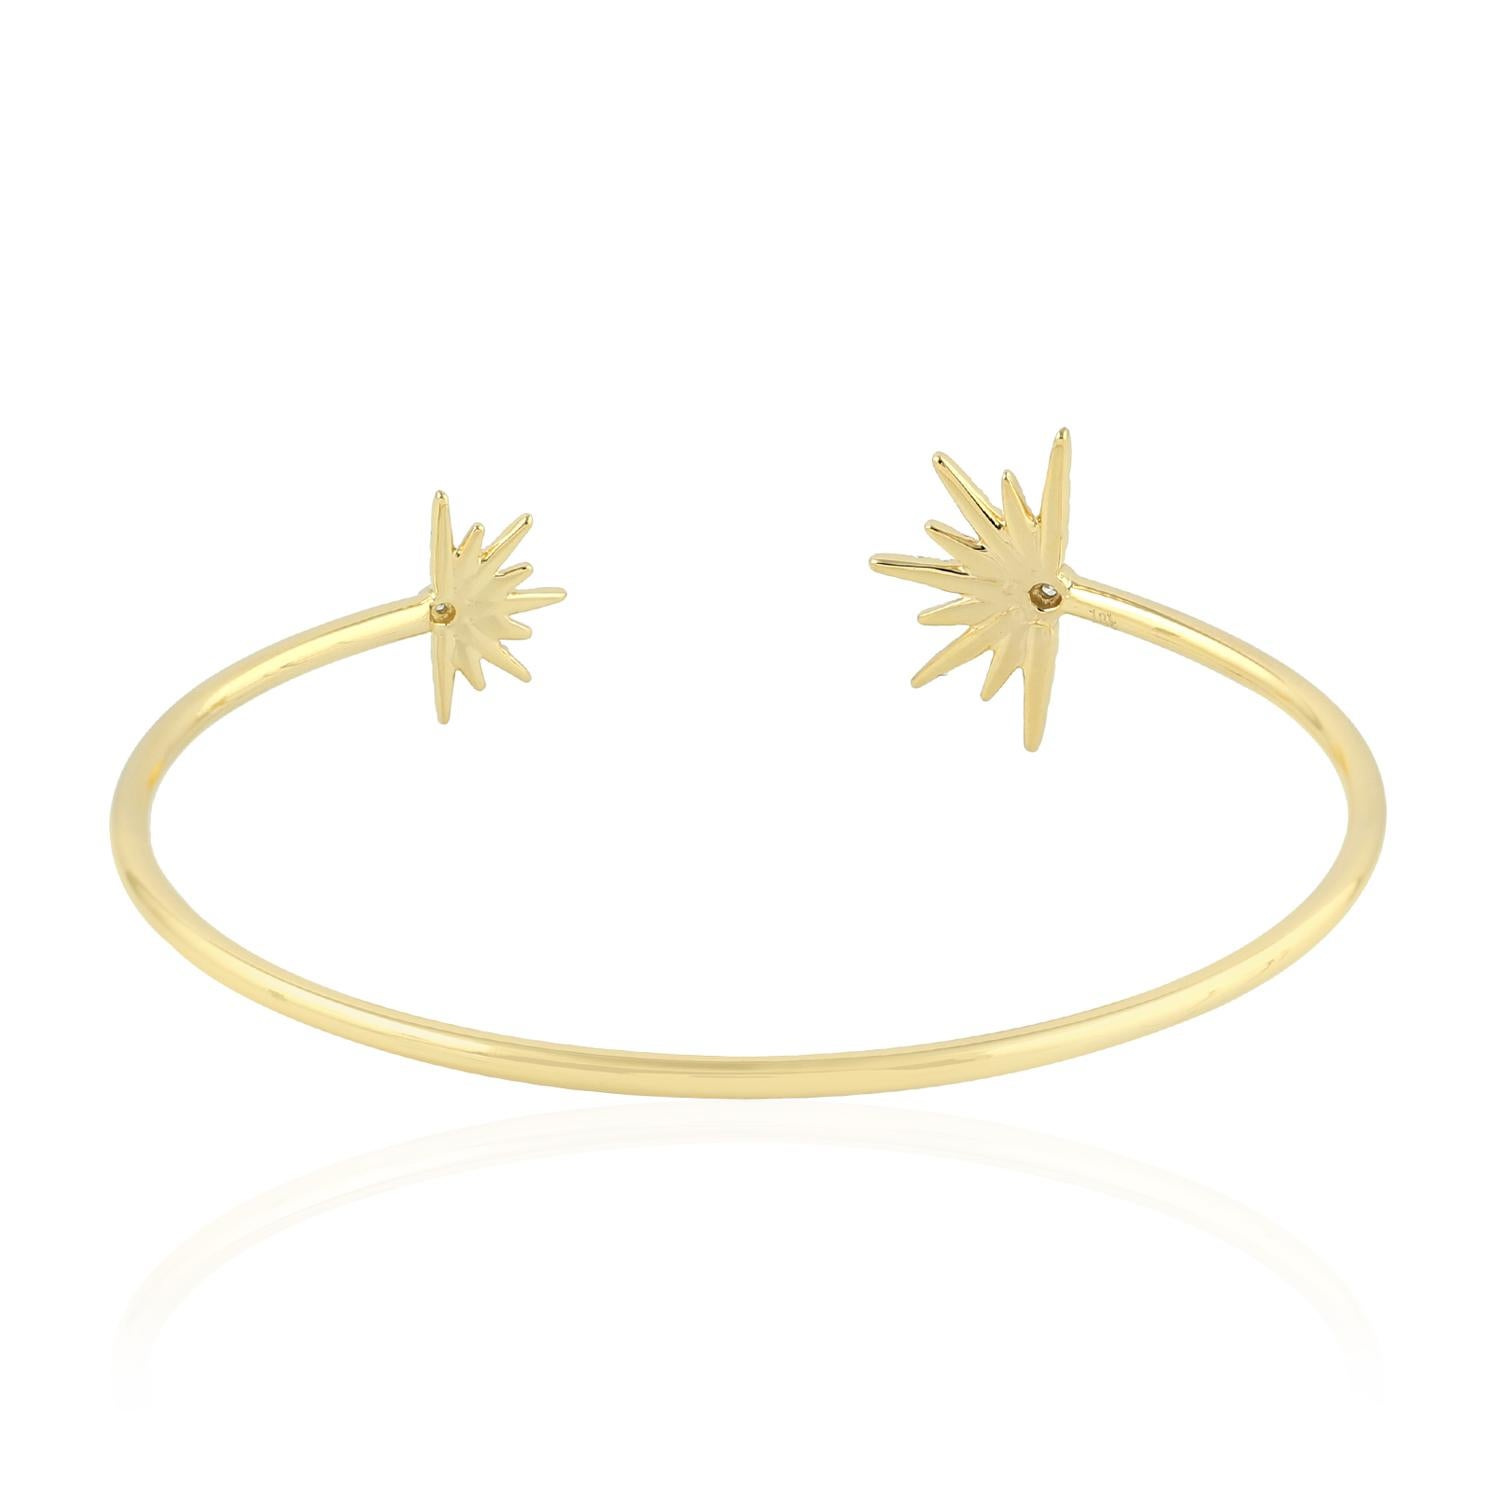 Cast from 18-karat gold, these bangle is hand set with .30 carats of sparkling diamonds. Available in rose, yellow & white gold. See other matching pieces that compliments with Sun collection.

FOLLOW  MEGHNA JEWELS storefront to view the latest